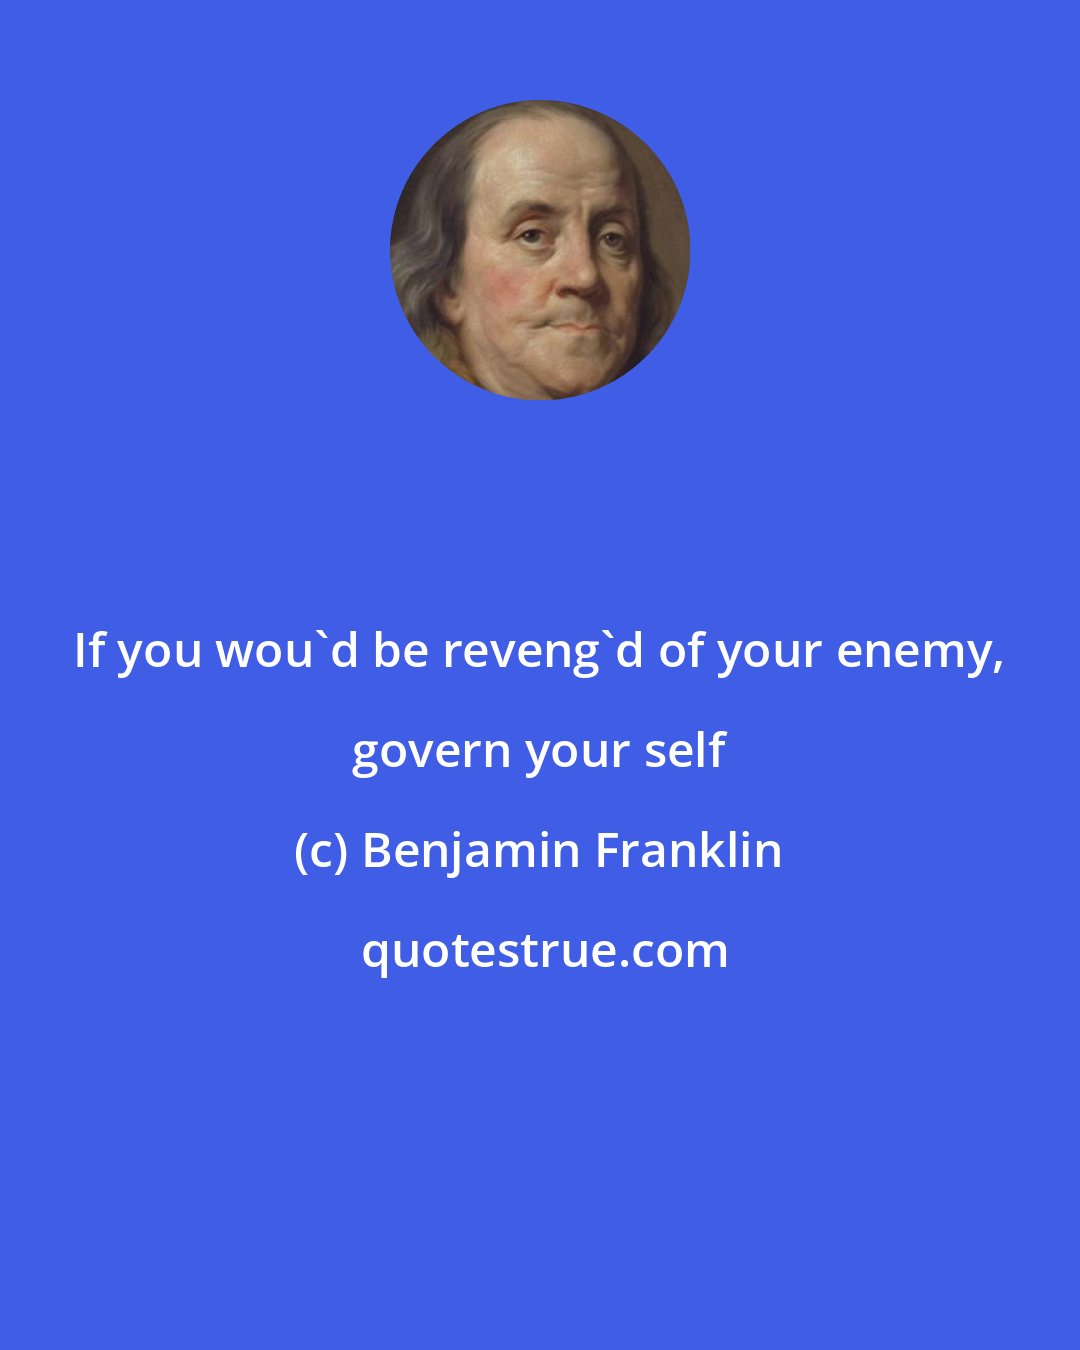 Benjamin Franklin: If you wou'd be reveng'd of your enemy, govern your self